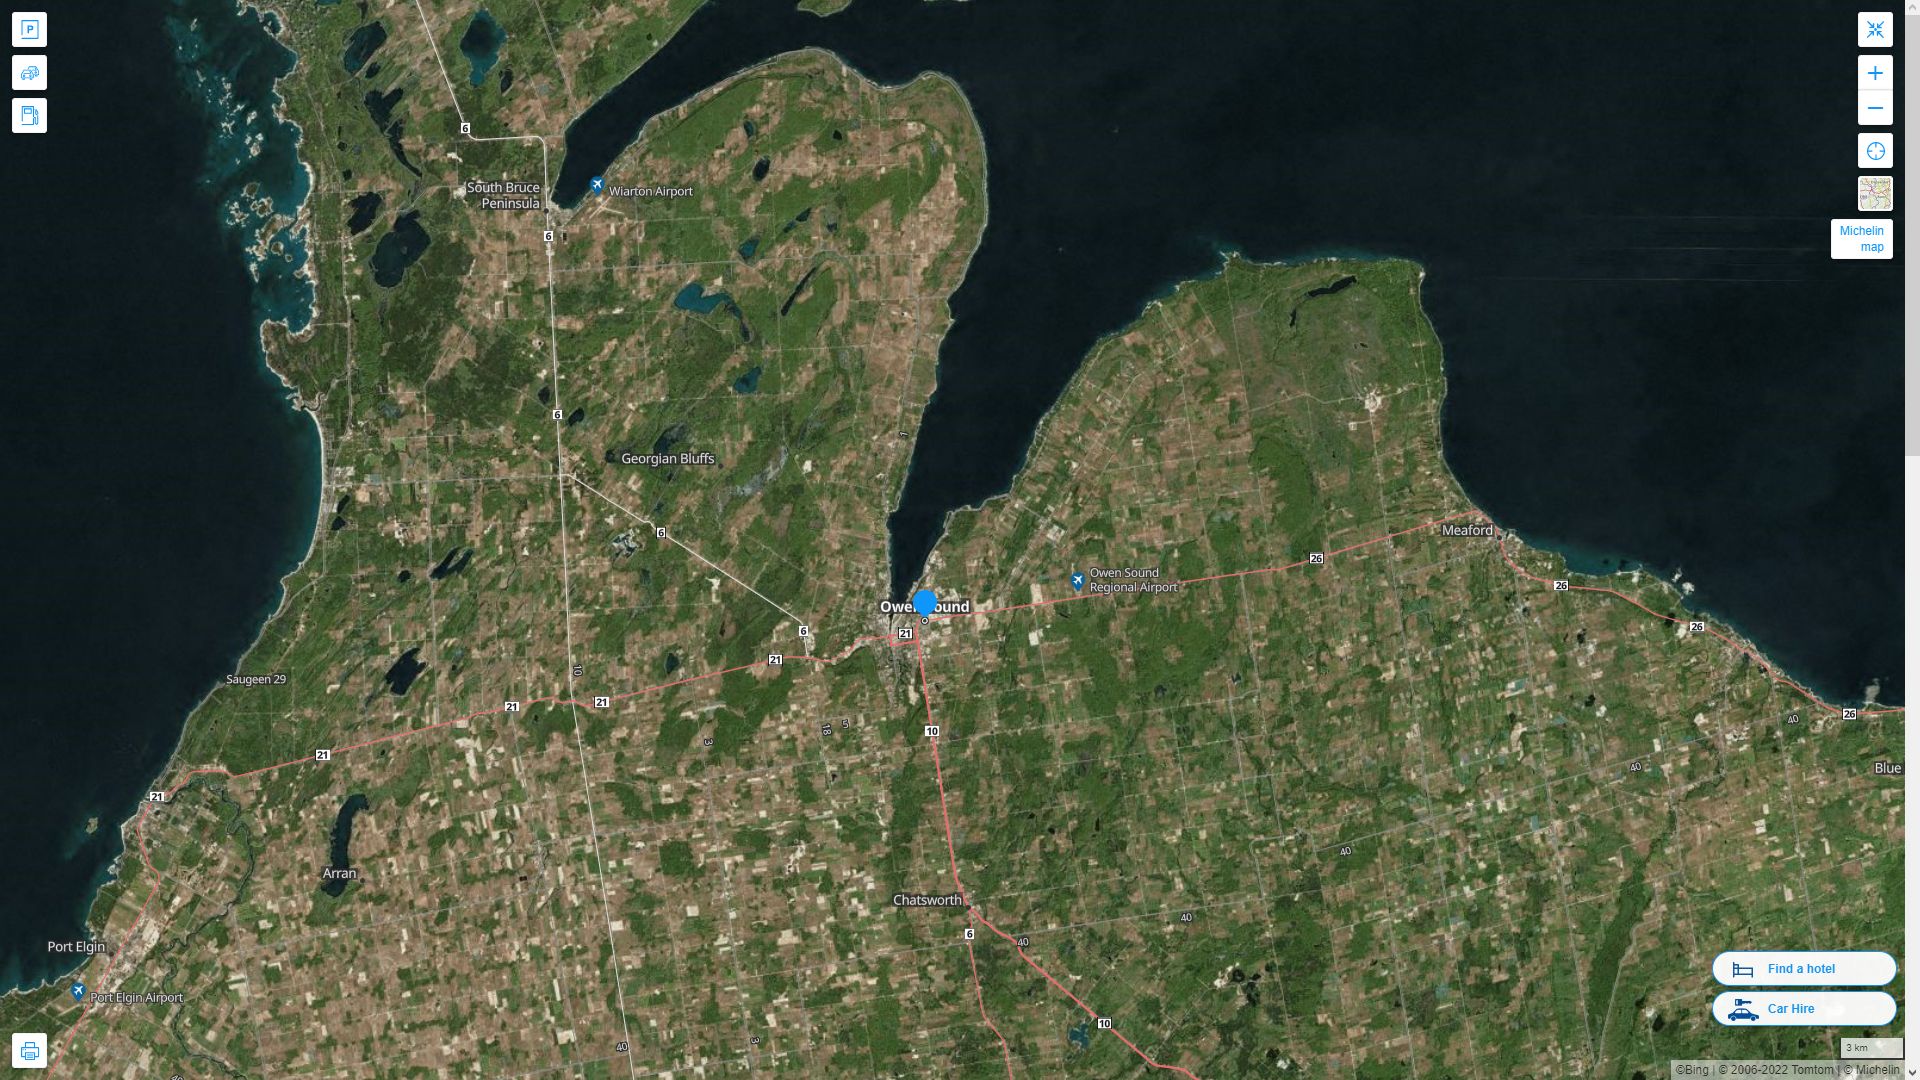 Owen Sound Highway and Road Map with Satellite View